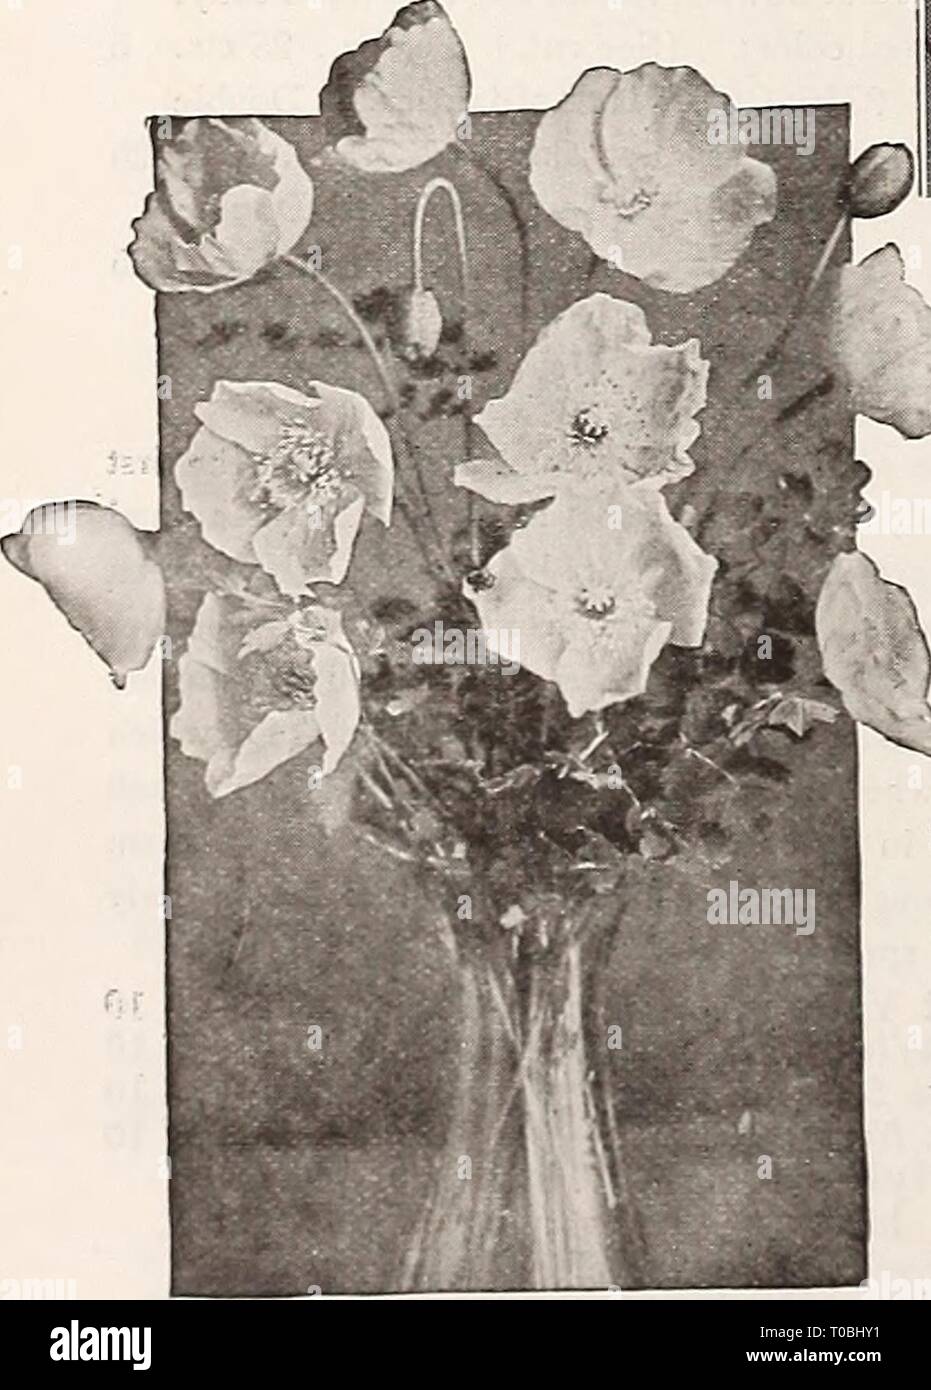 Dreer's garden book 1921 (1921) Dreer's garden book 1921 dreersgardenbook1921henr Year: 1921  Oriental Poppy Platycodon Grandiflorom Iceland Poppies (offered on page 103) FI^ATYCODON (Balloon Flower, or Japanese Bellflower) One of the best hardy perennials, pro- ducing very showy flowers during the whole season. They form large clumps and are excellent for planting in permanent borders or among shrubbery; easilyraised fromseed, which begins blooming in August if sown outdoors in April. (See cut.) PER PKT. 3663 Qrandiflorum. Large steel blue flowers.  oz., 40 cts 10 3664 — Album. Pure white va Stock Photo